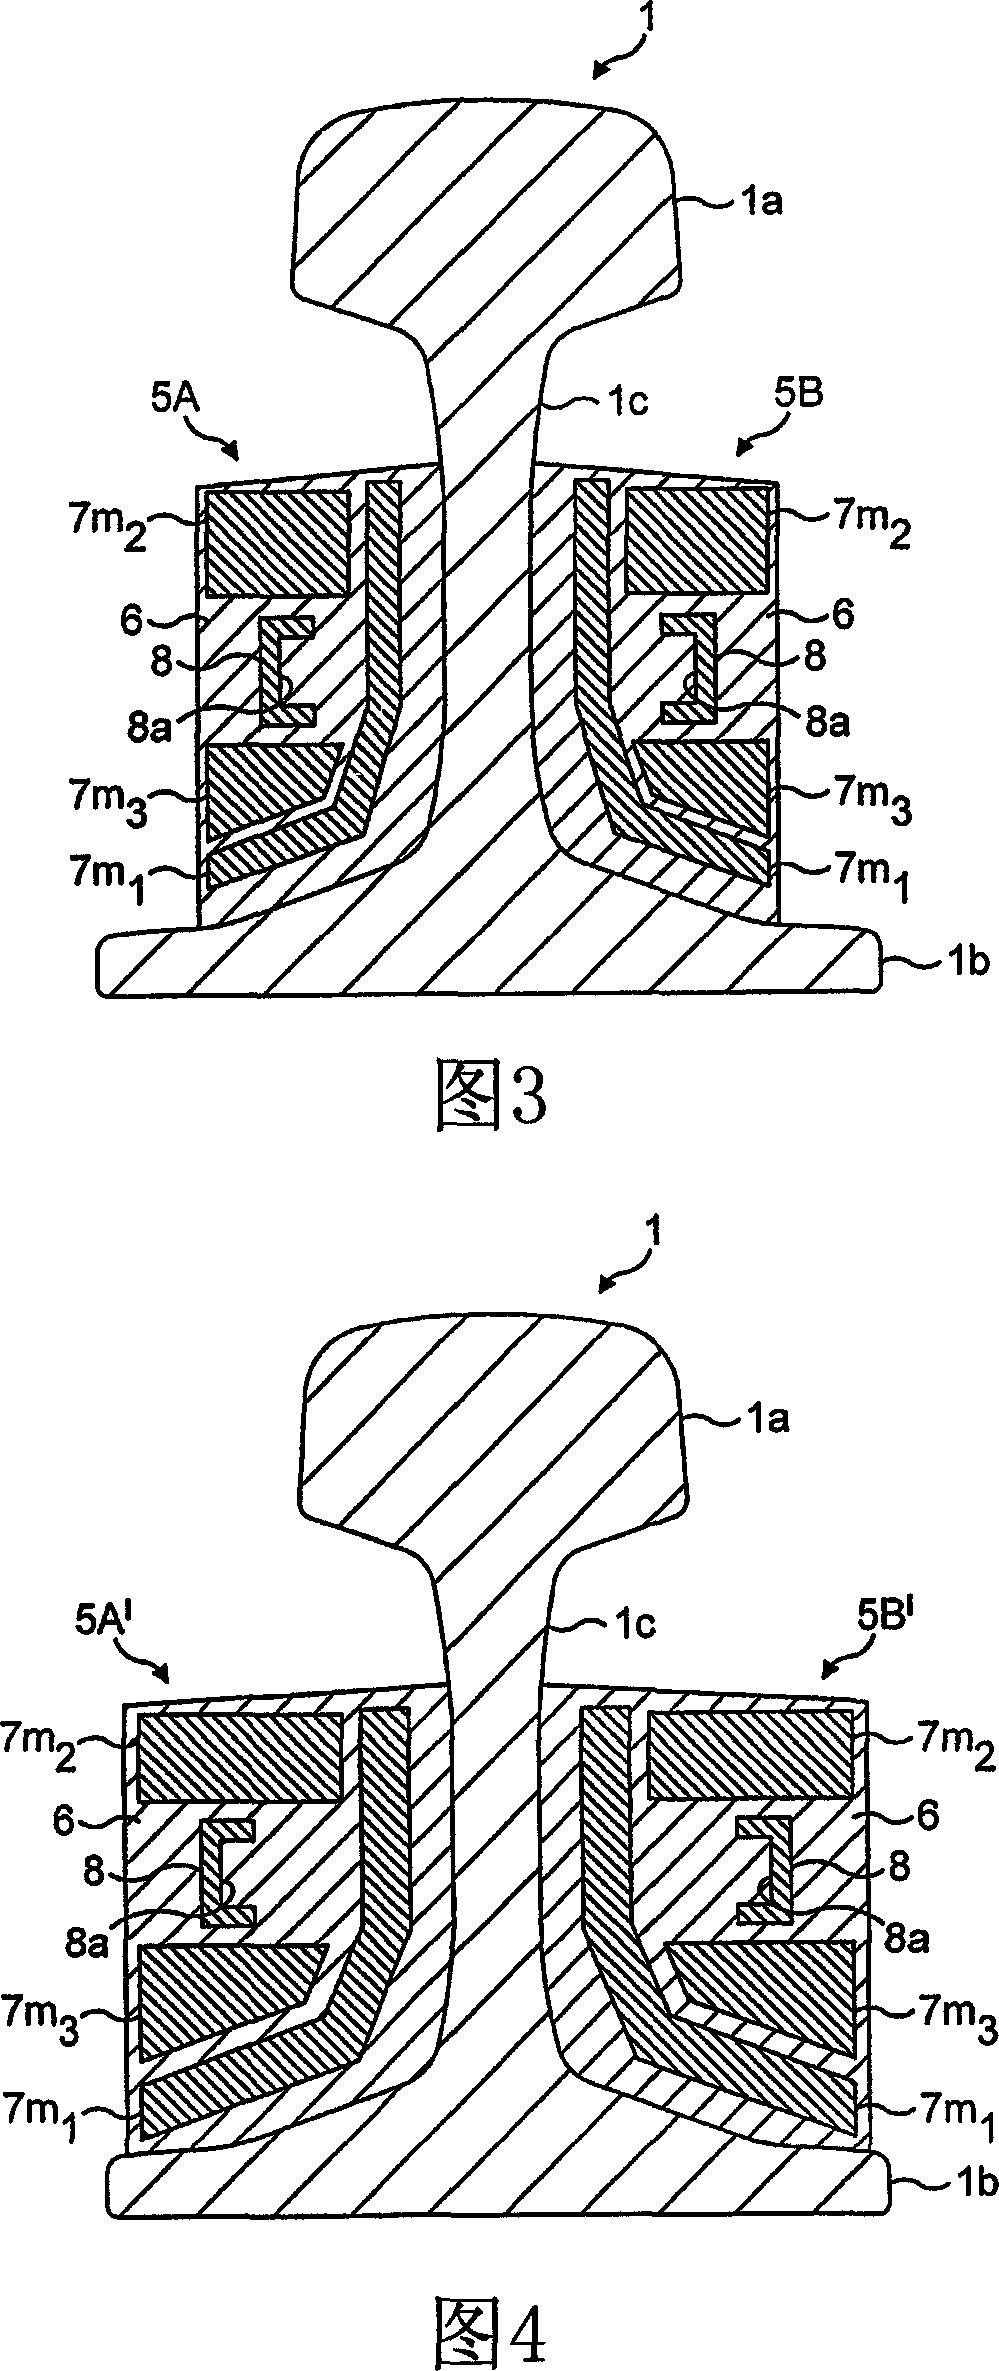 Tuned absorbers for rails